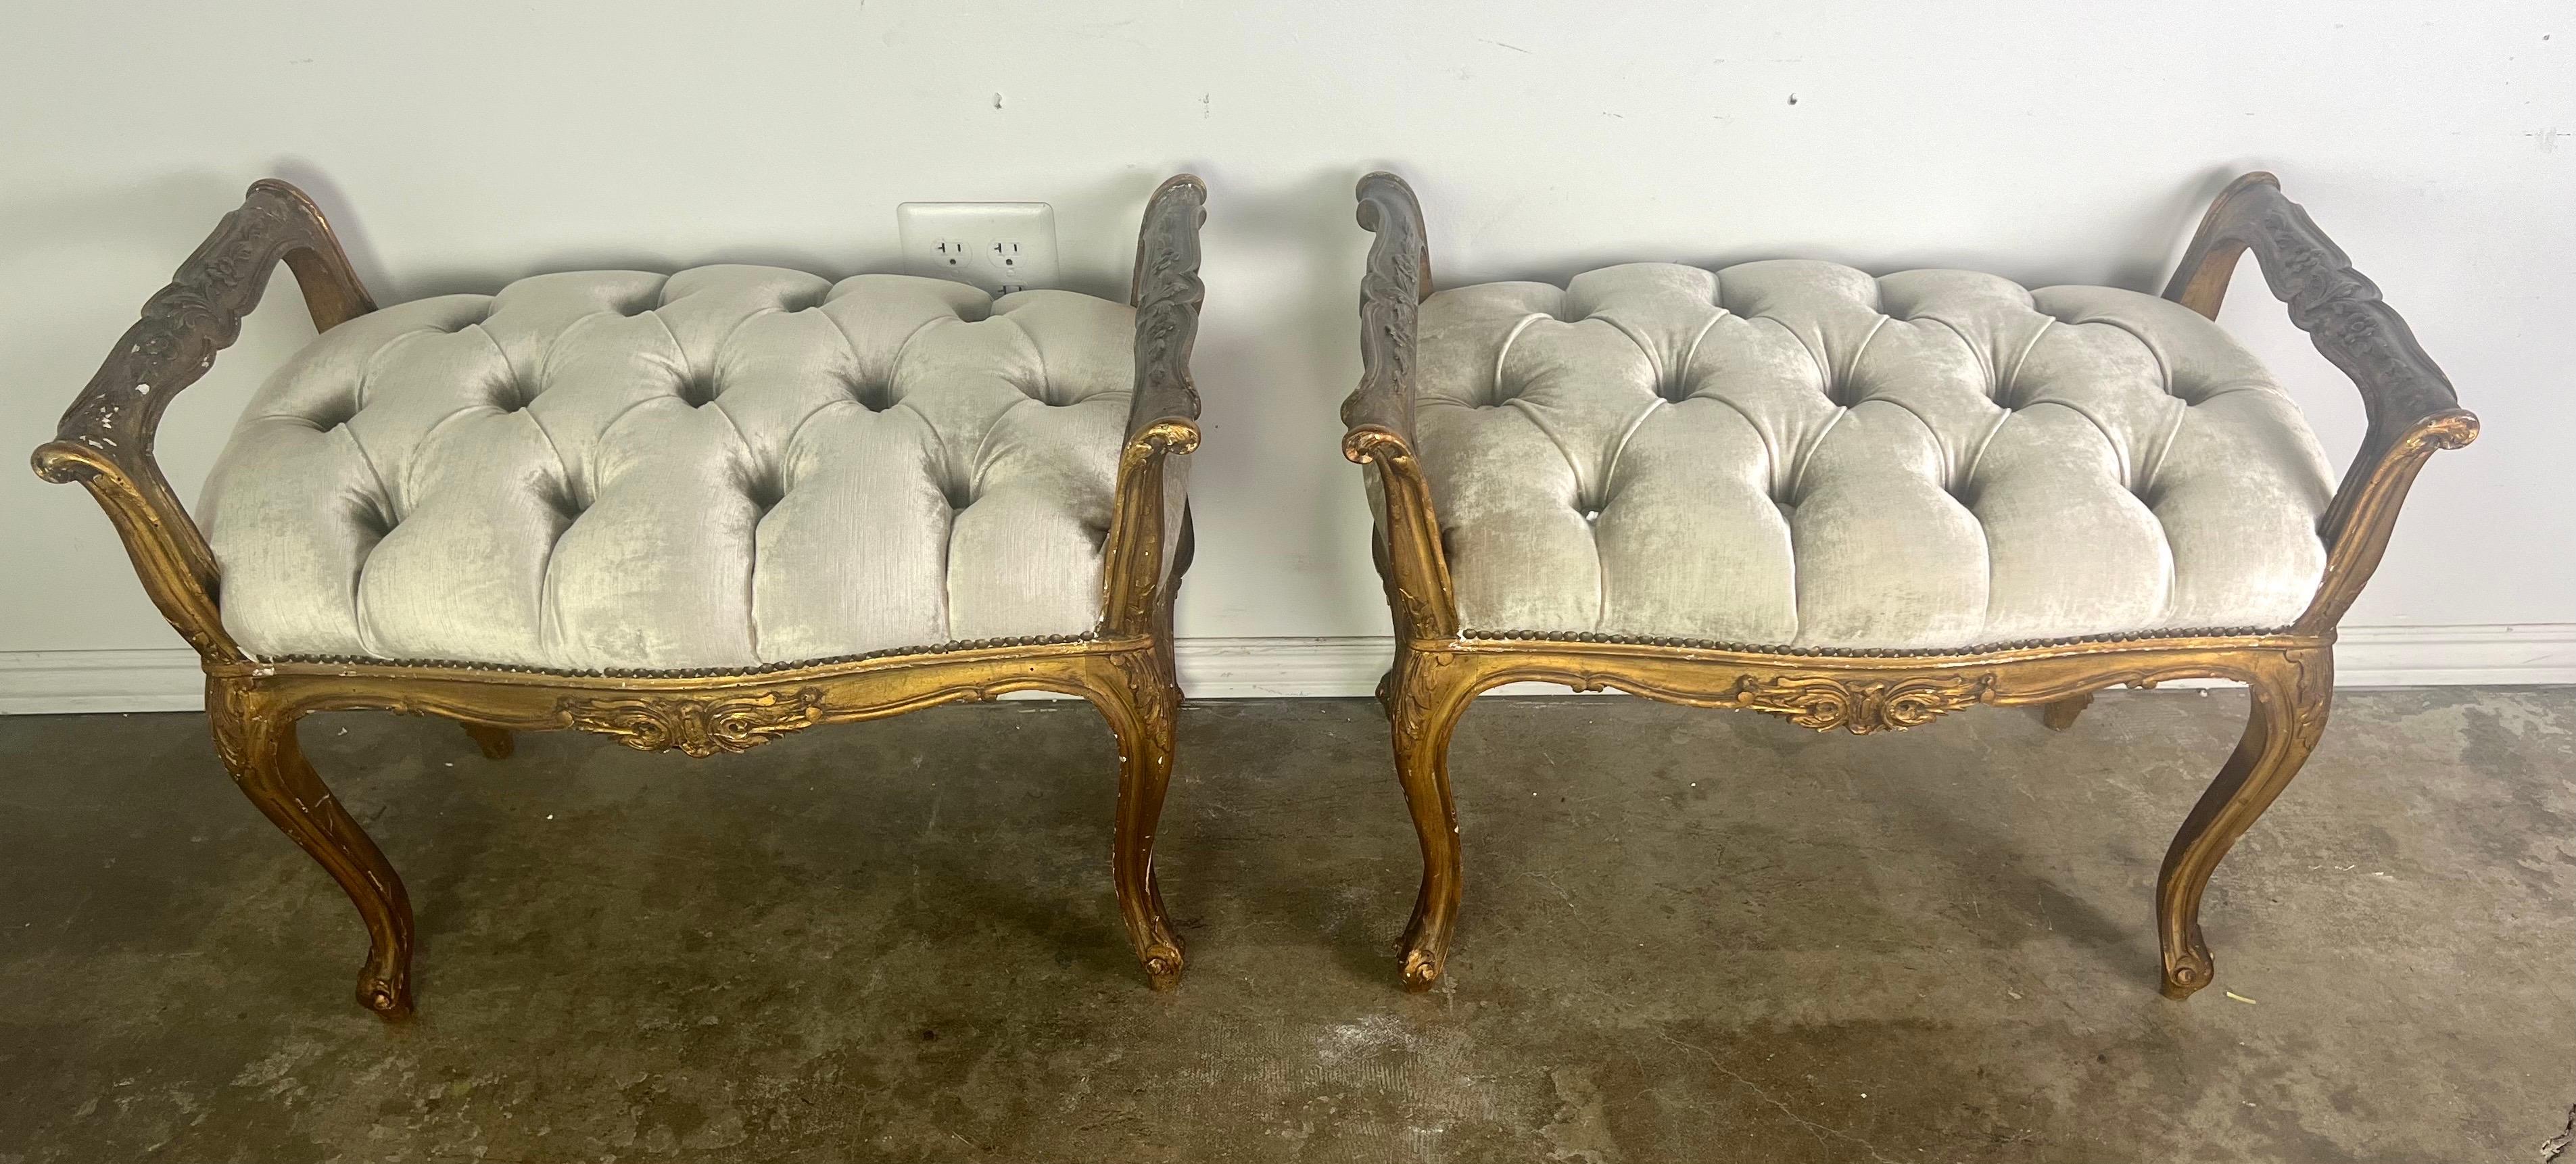 Pair of French Louis XV style gilt wood benches. Each bench features elegantly carved gilt wood frames with intricate detailing, including scrolls and floral motifs, which highlight the craftsmanship typical of French furniture design.  The benches